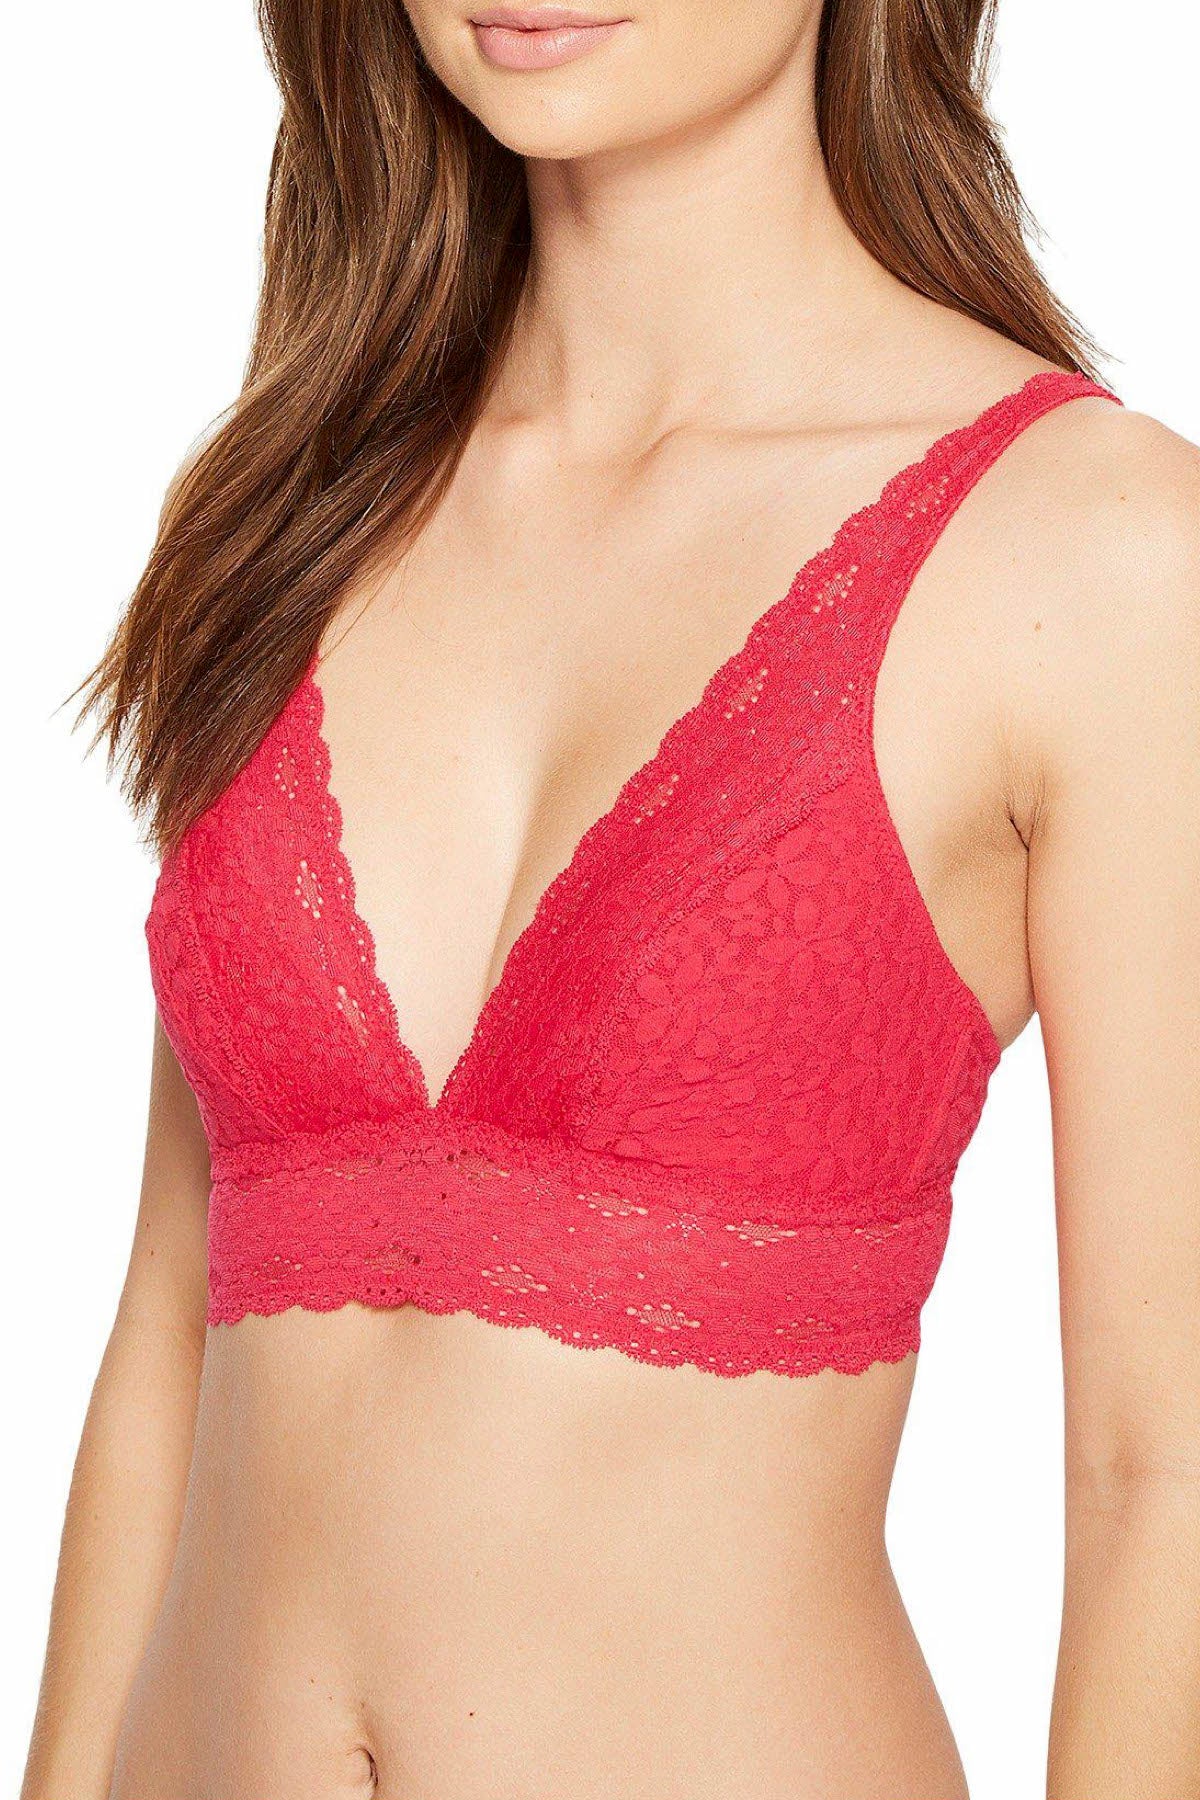 Wacoal Halo Lace Convertible Soft Cup Bralette in Love Potion